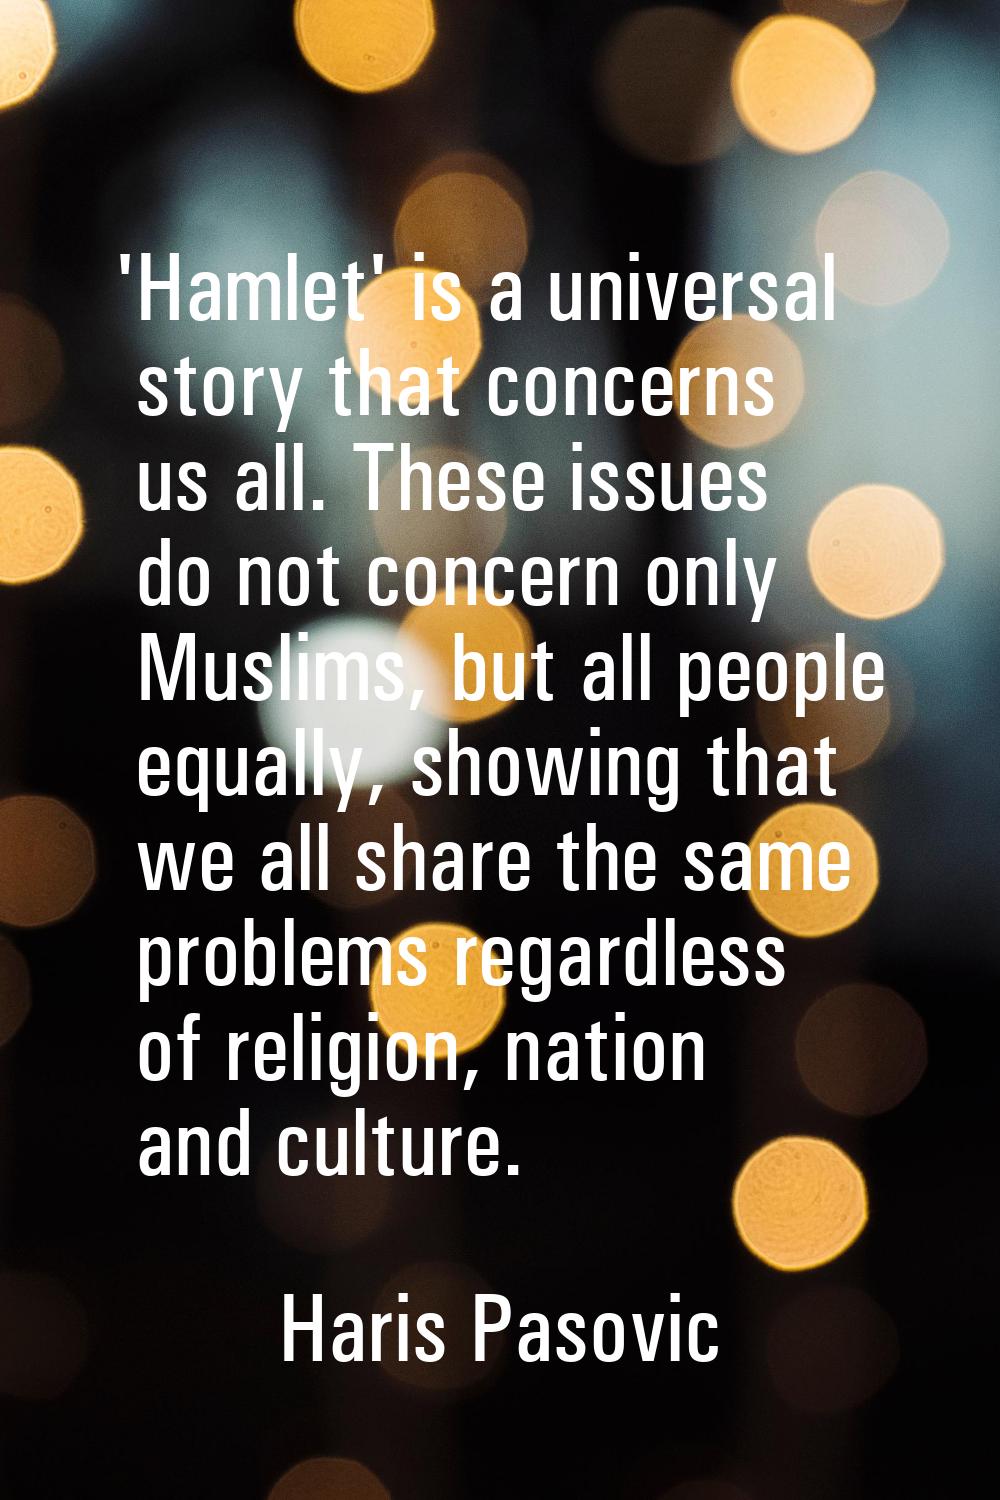 'Hamlet' is a universal story that concerns us all. These issues do not concern only Muslims, but a